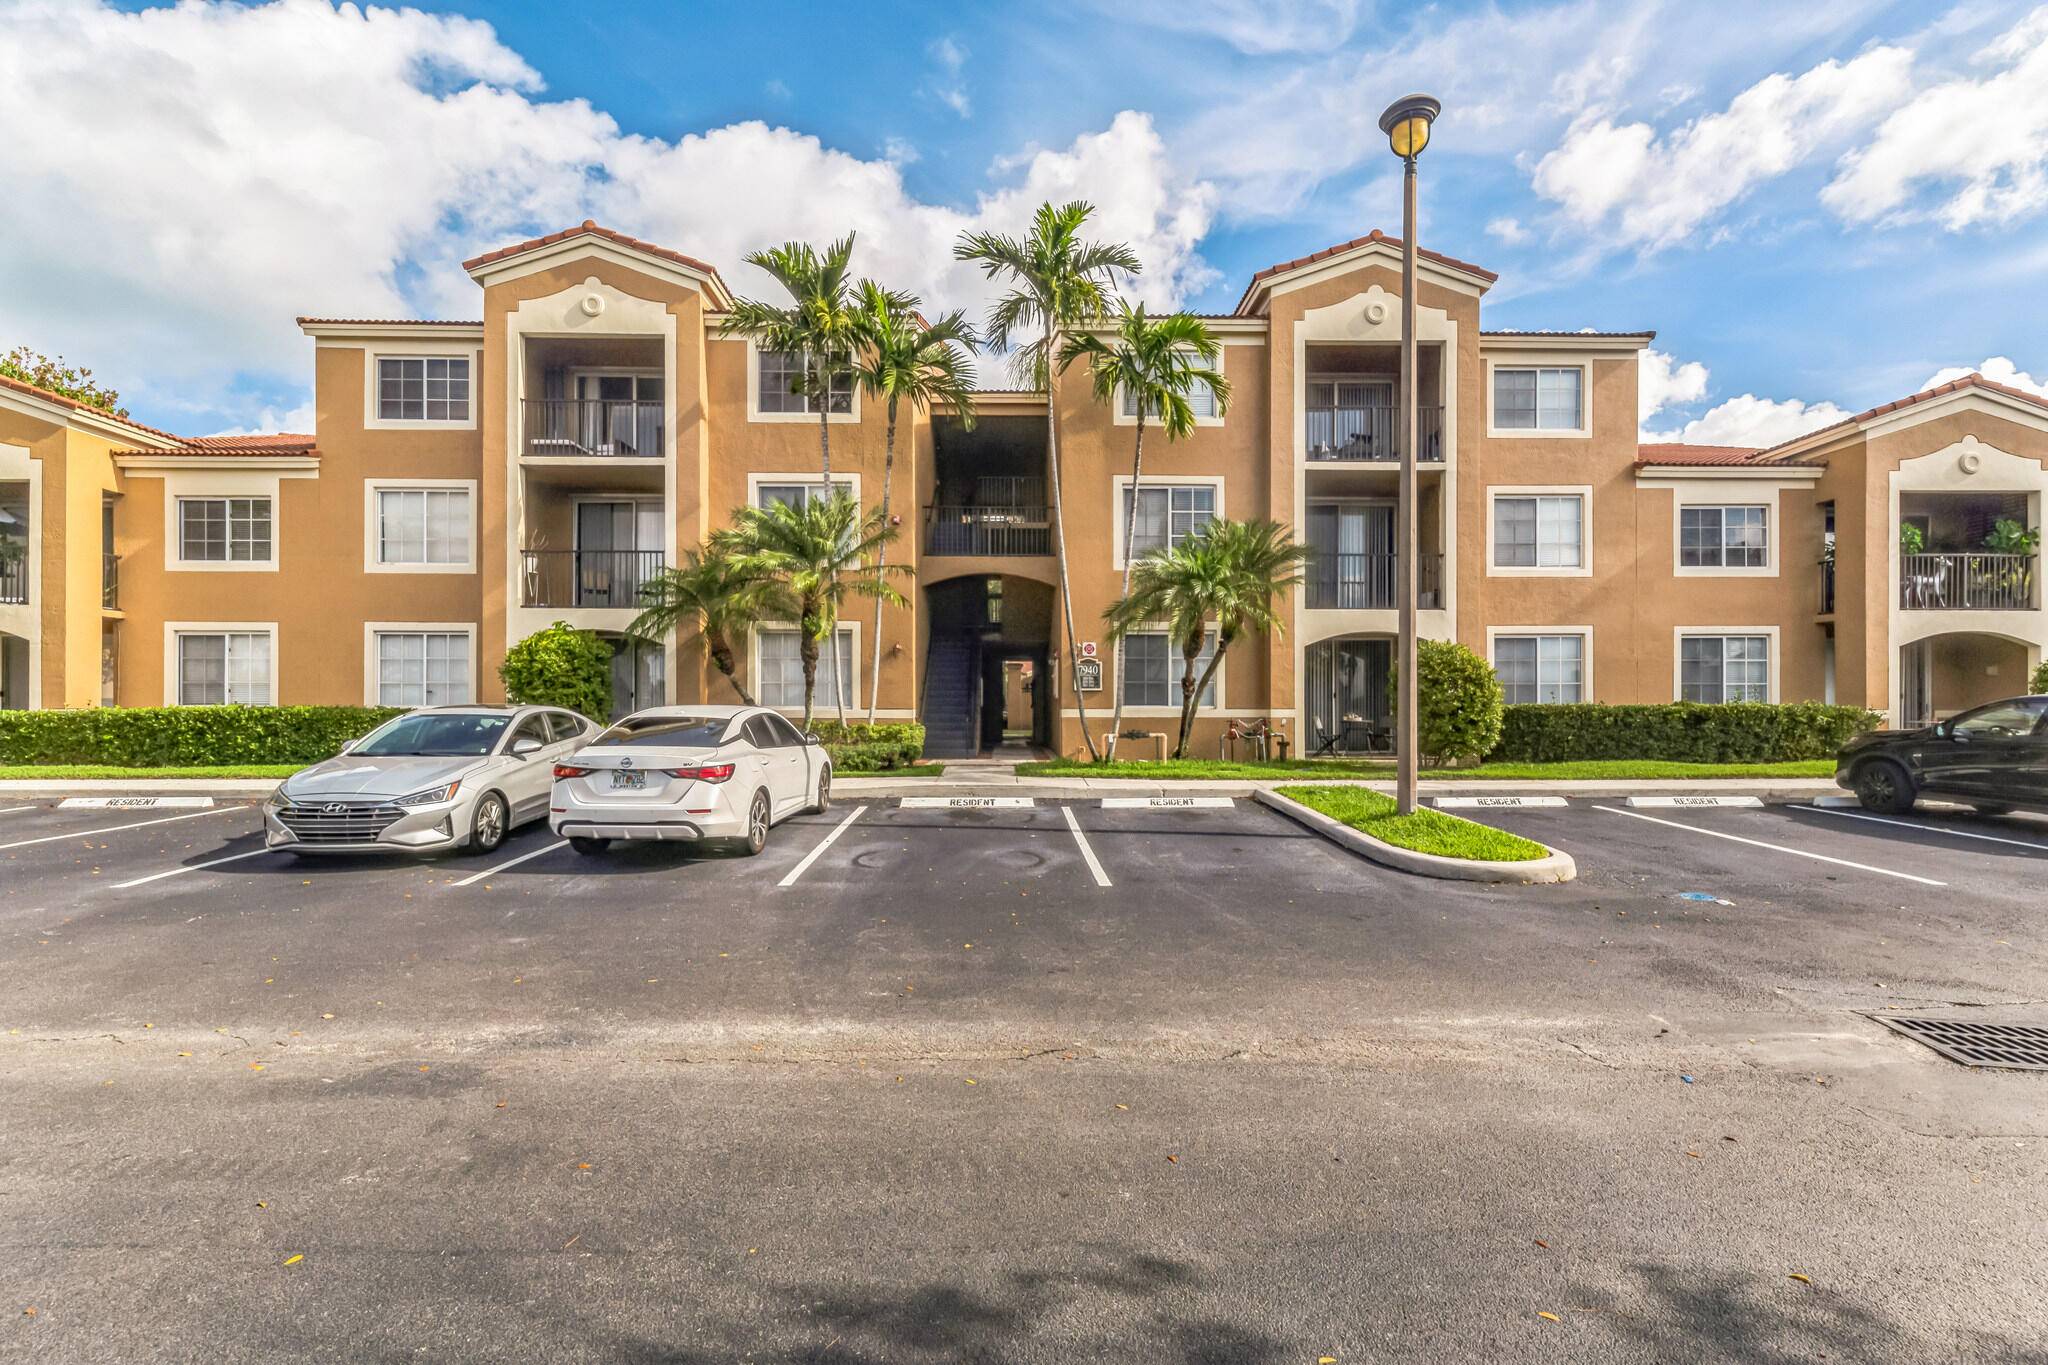 Wonderful 2 bedroom 2 bathroom condo located in the lovely, gated community of St.